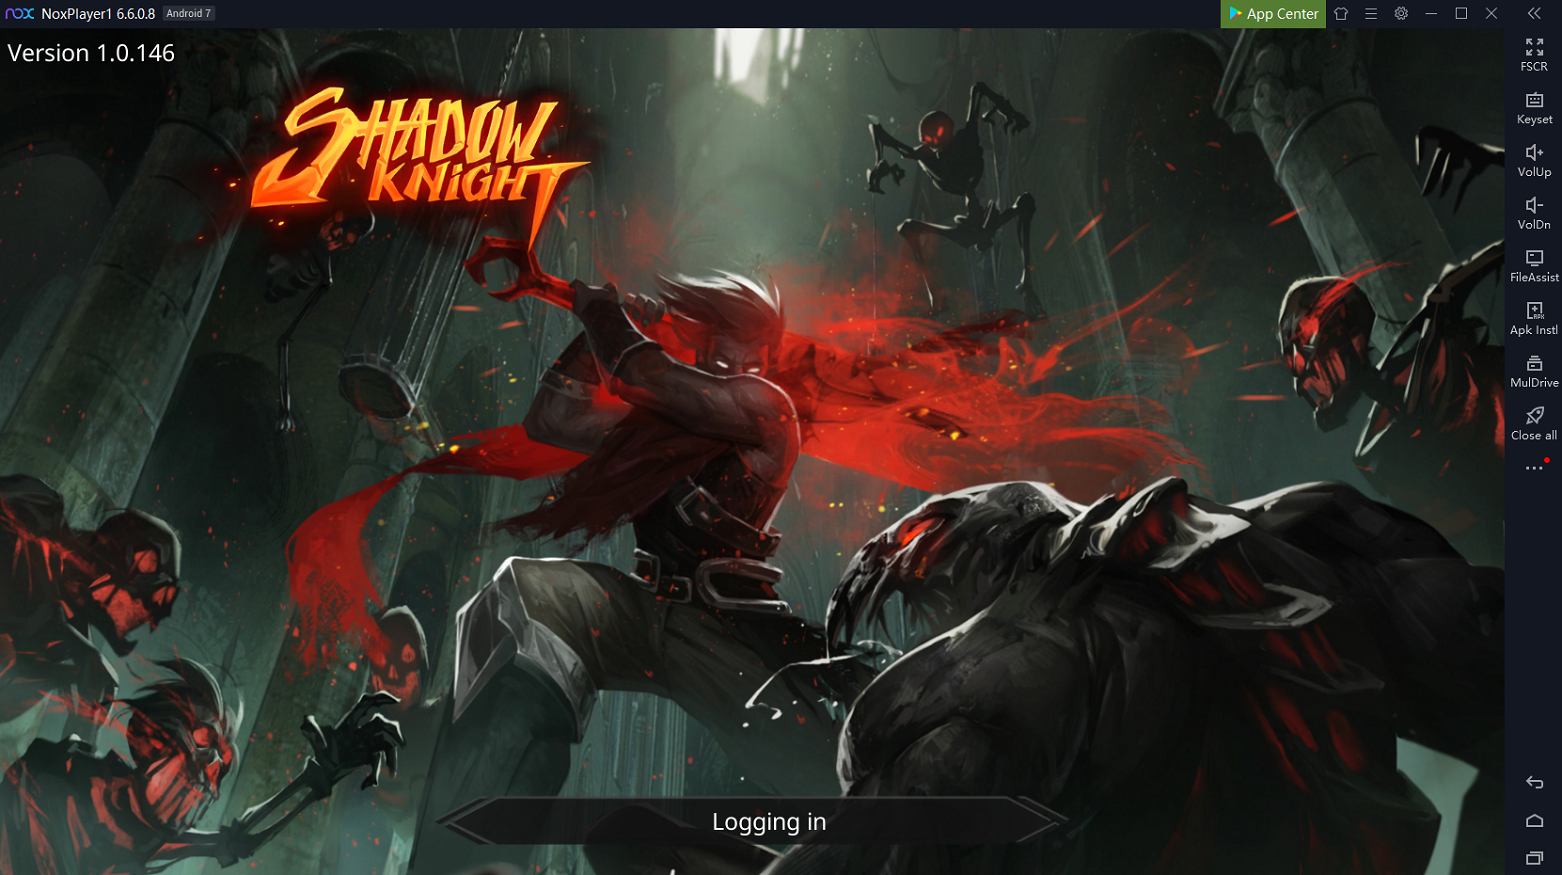 Download And Play Shadow Knight Deathly Adventure Rpg On Pc With Noxplayer Noxplayer